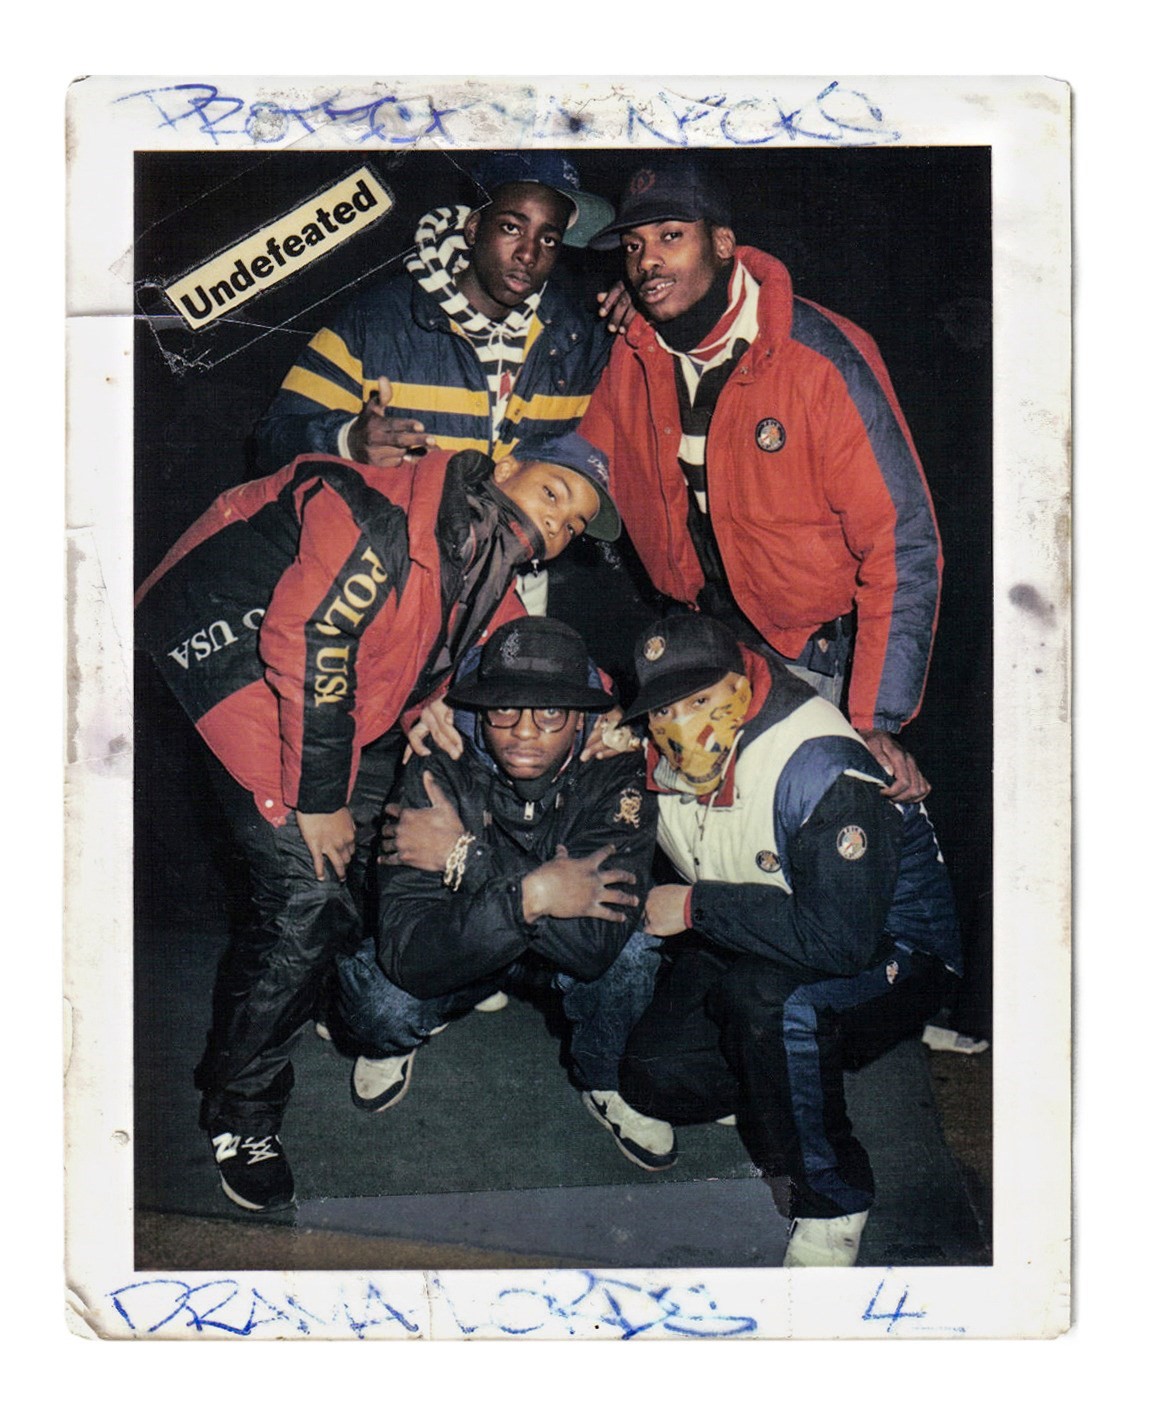 Polo Ralph Lauren Archives - Hip-Hop Wired